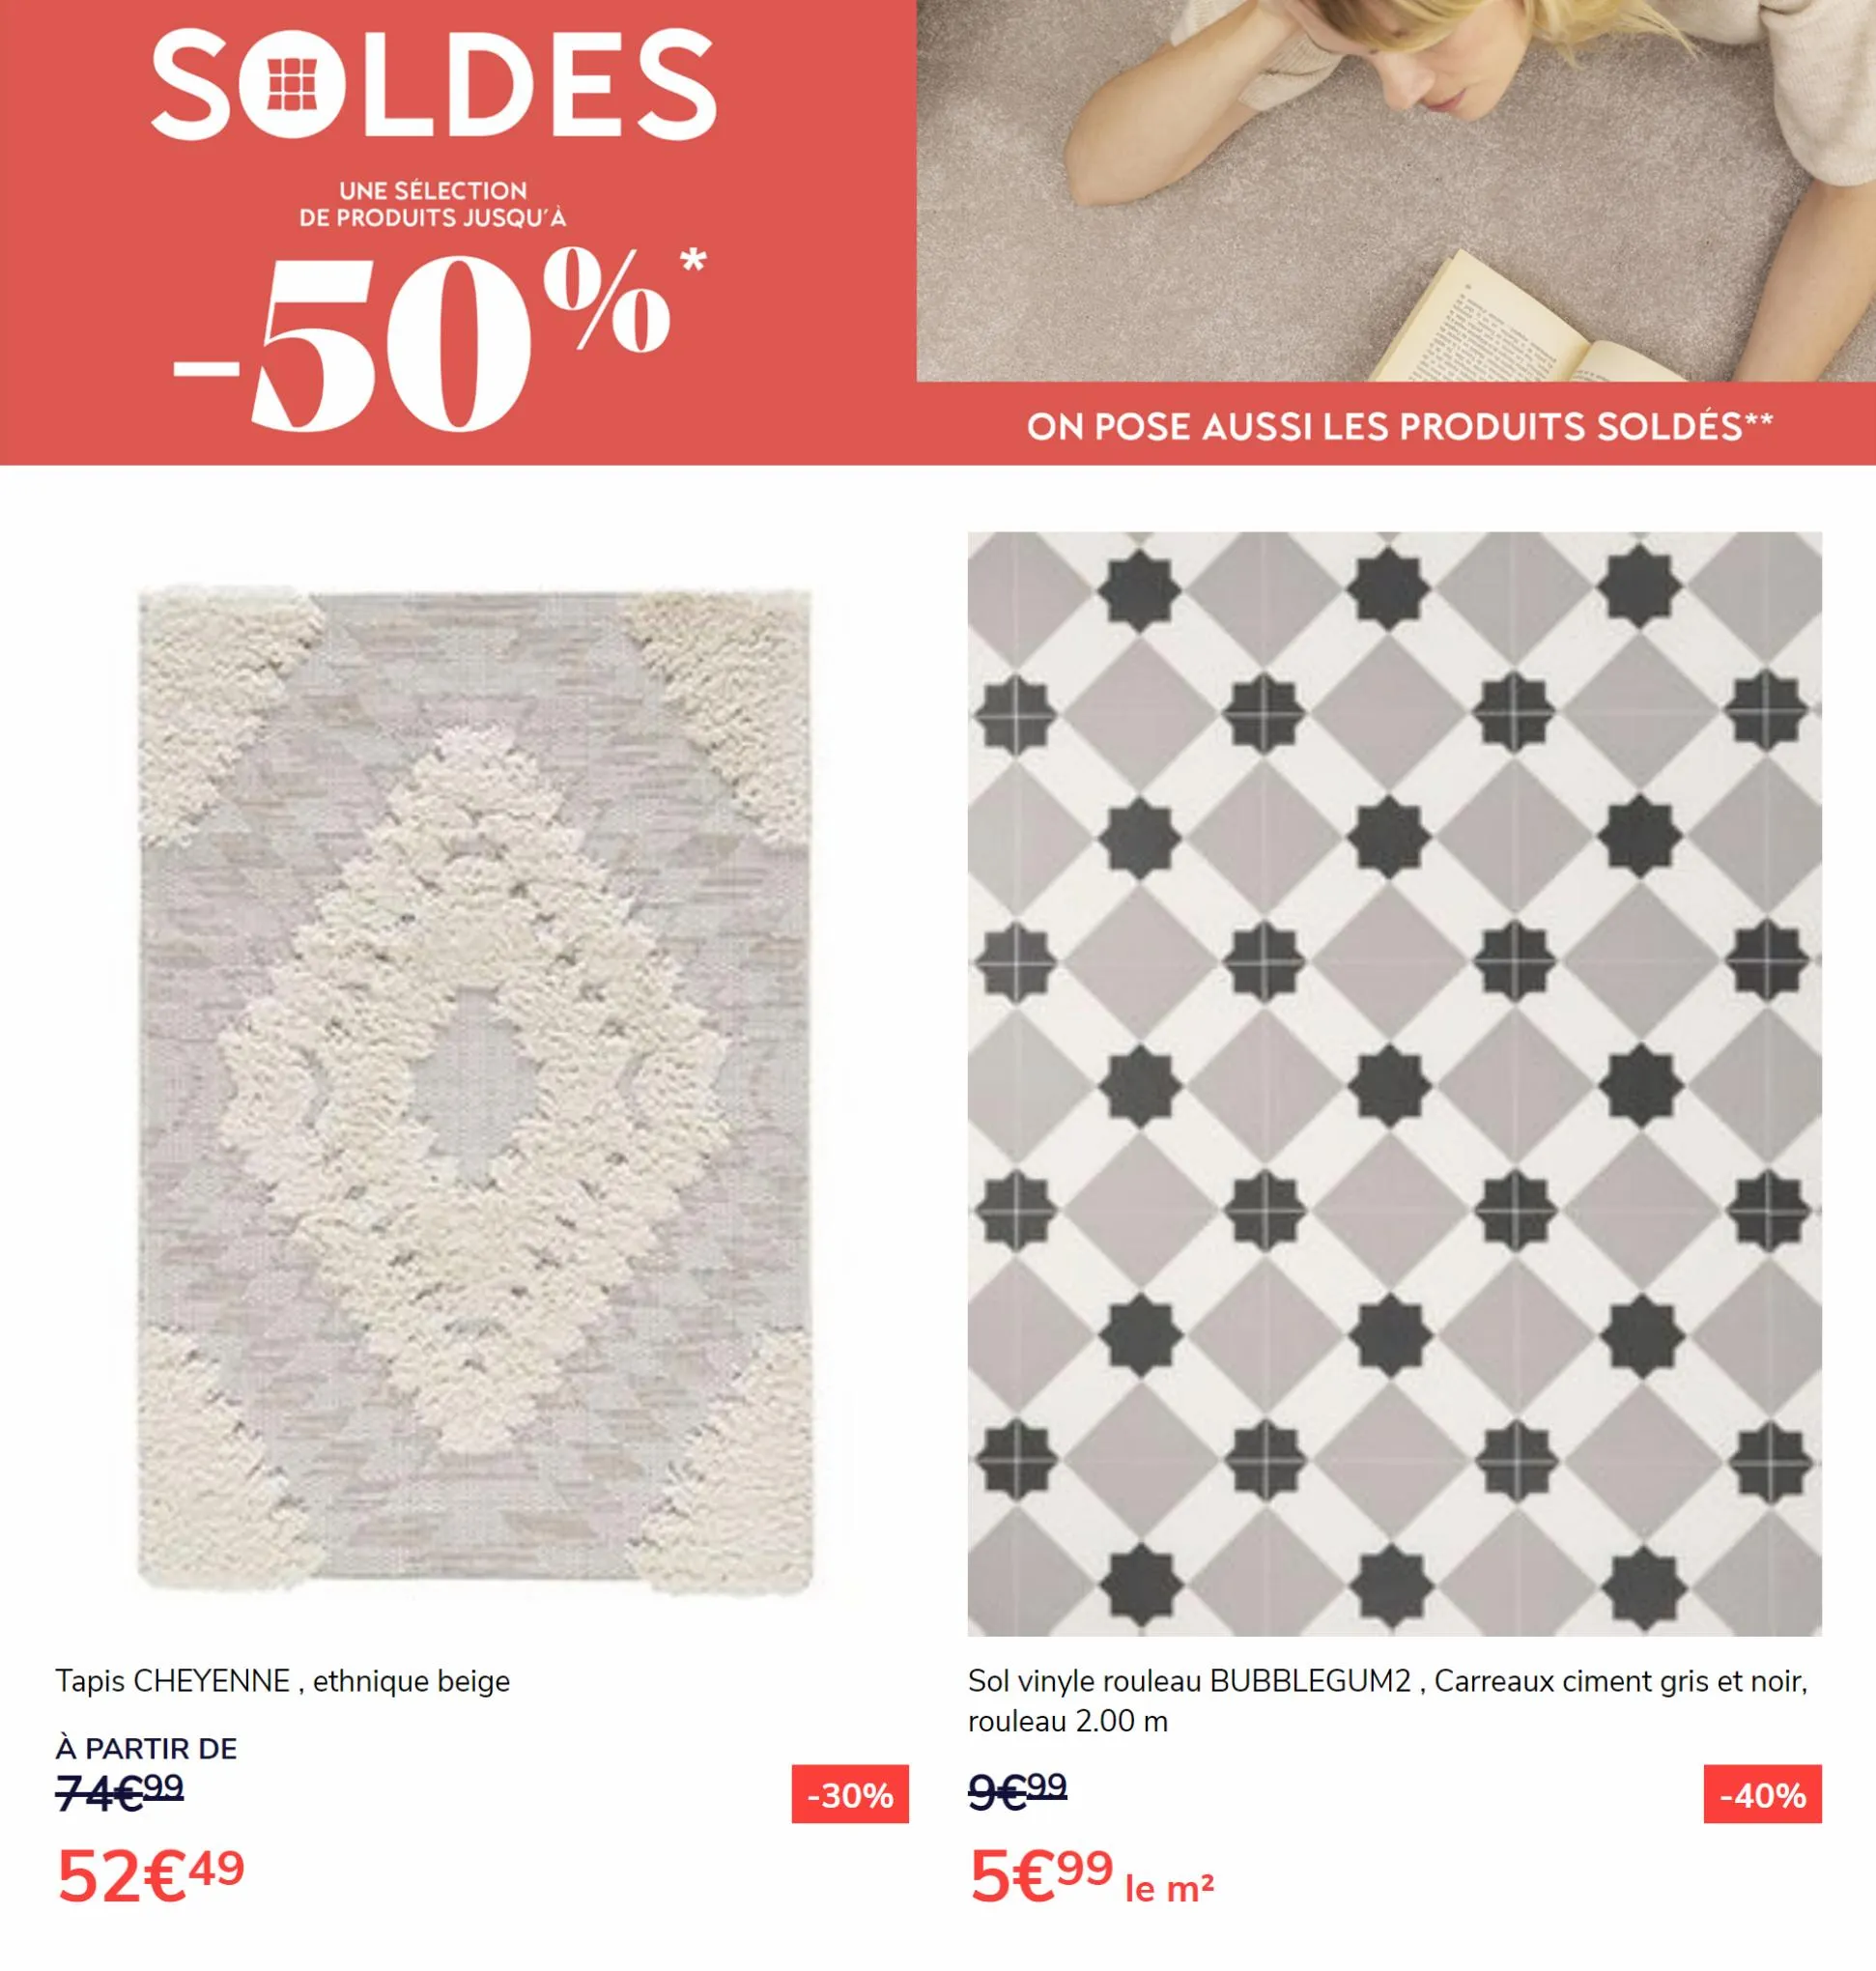 Catalogue SOLDES 50%, page 00003